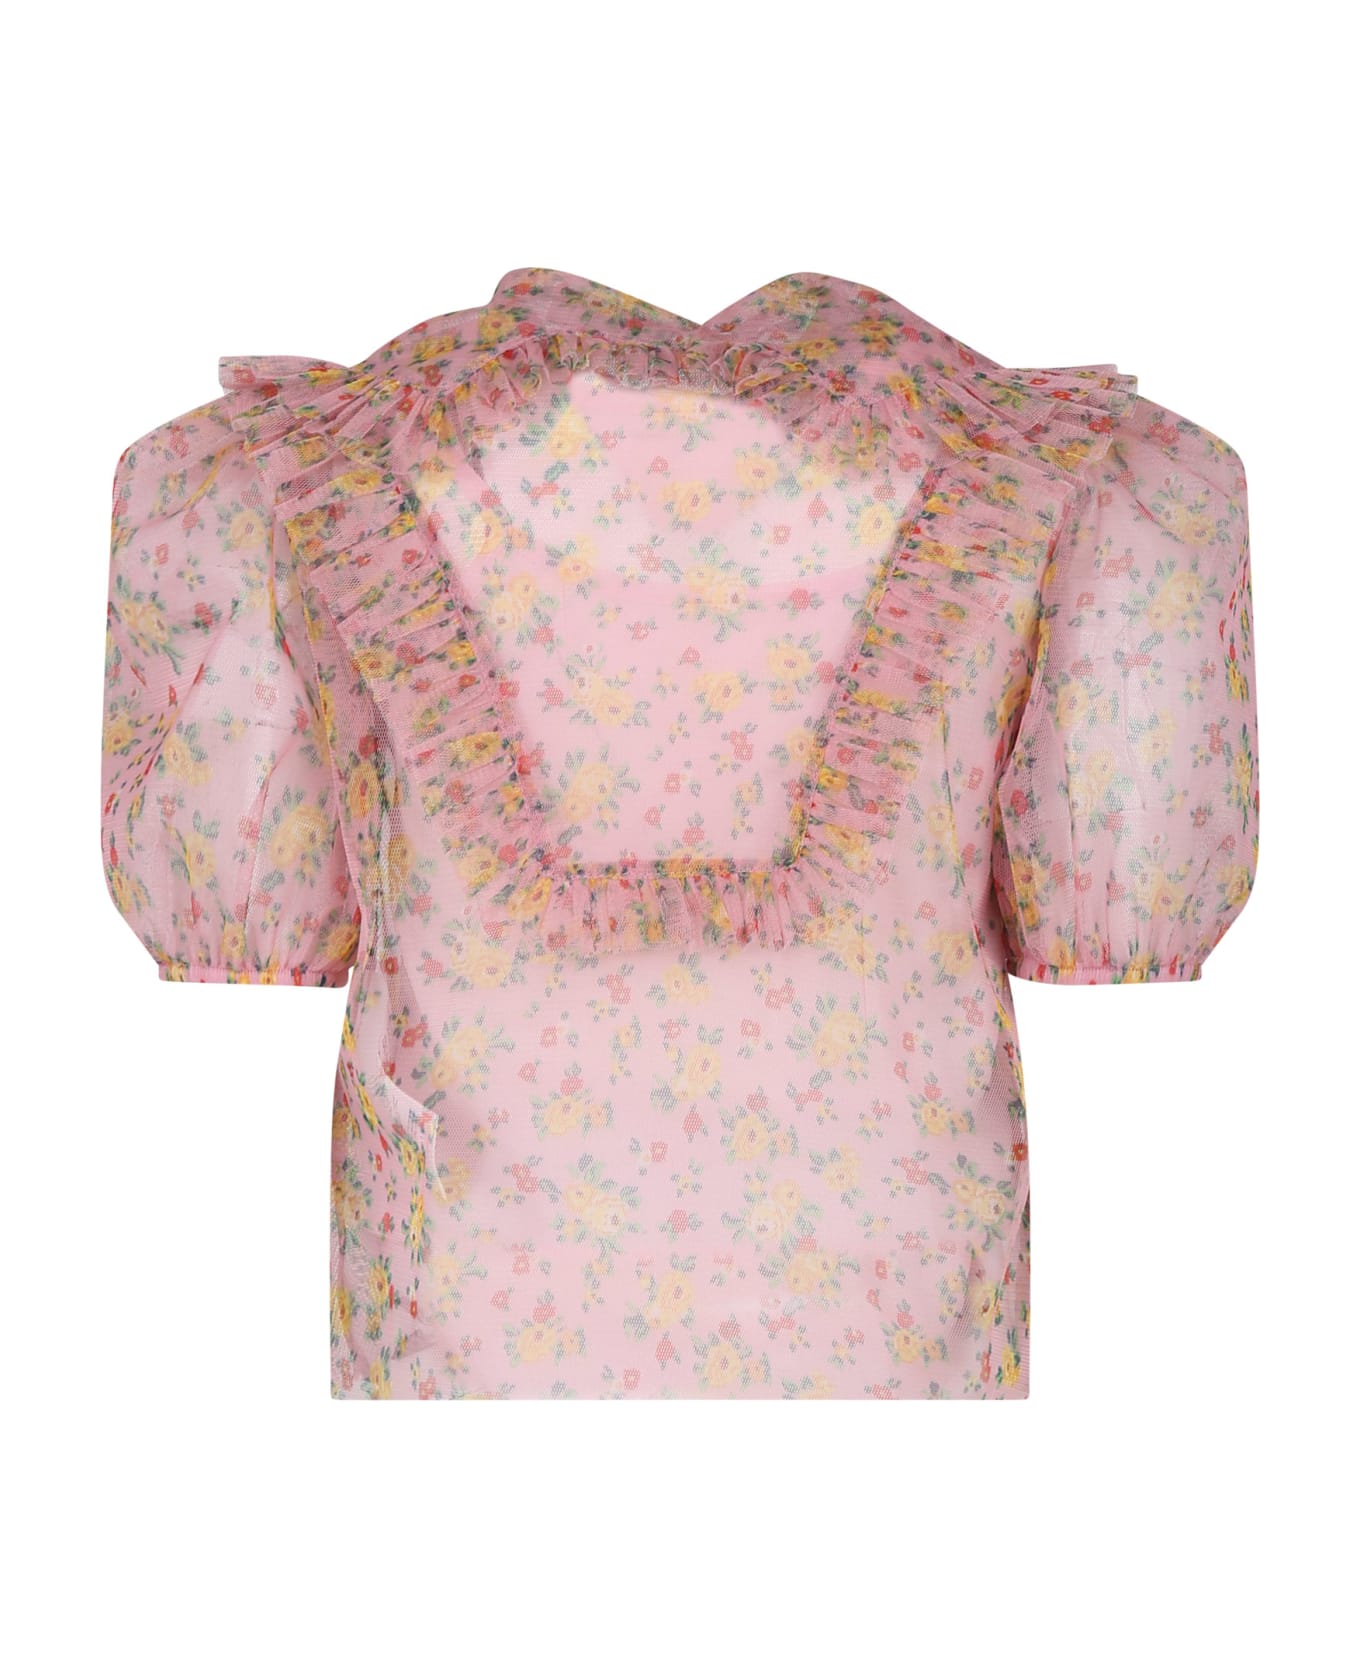 Philosophy di Lorenzo Serafini Kids Pink Shirt For Girl With Floral Print - Multicolor シャツ